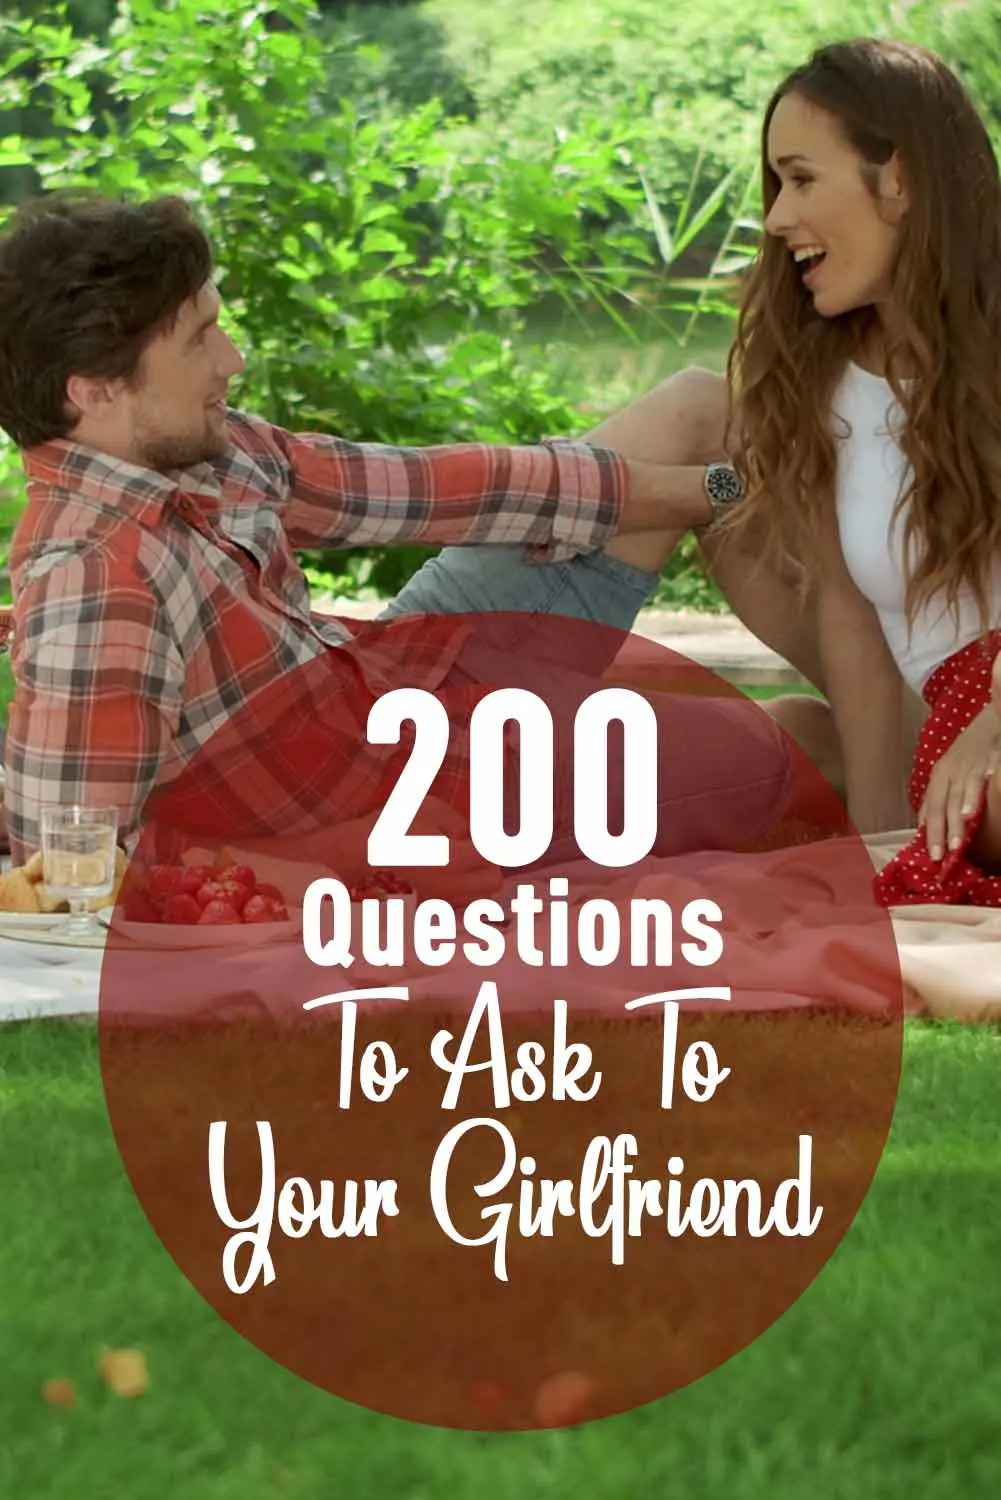 200+ Questions to Ask your Girlfriend (From Cute to Naughty)